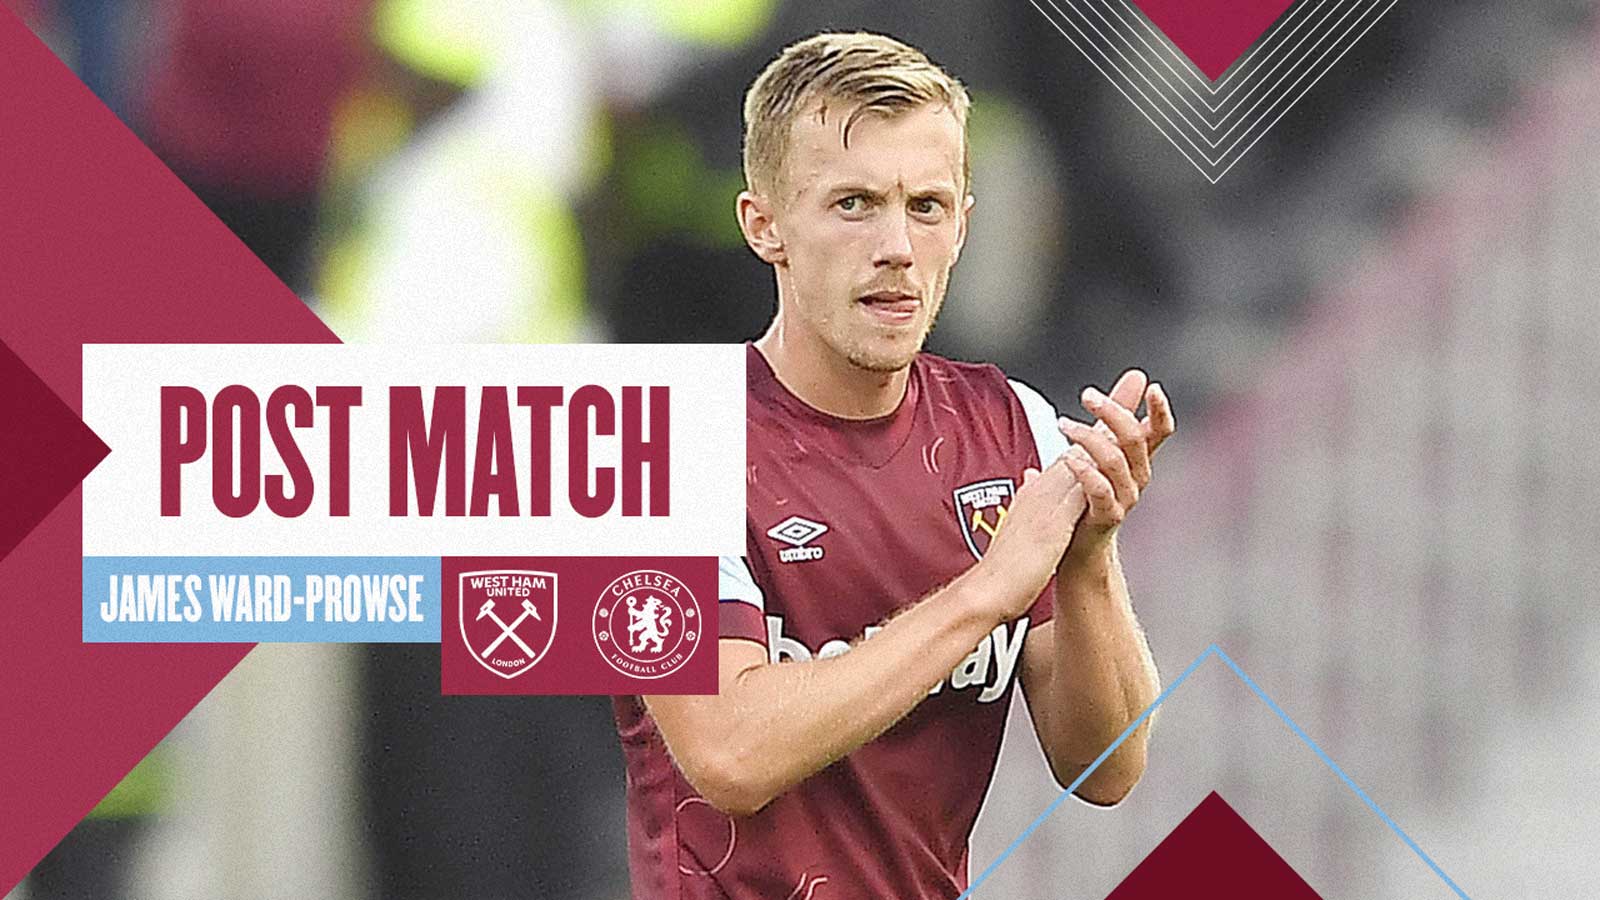 James Ward-Prowse post-match